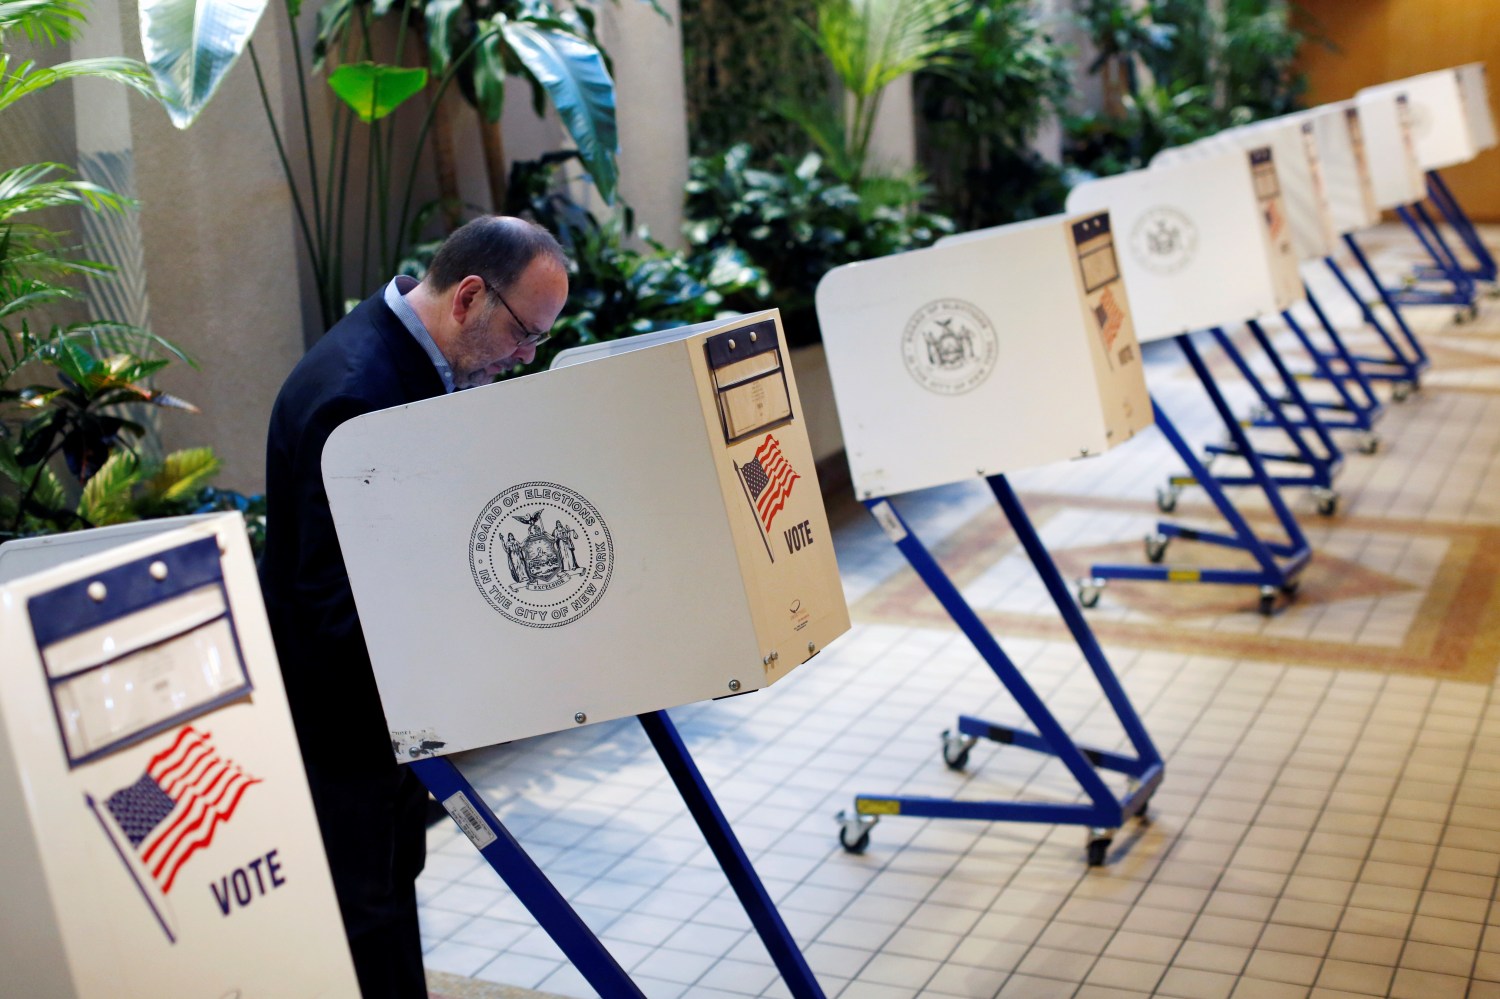 A man votes at a small, desk-style voting booth.